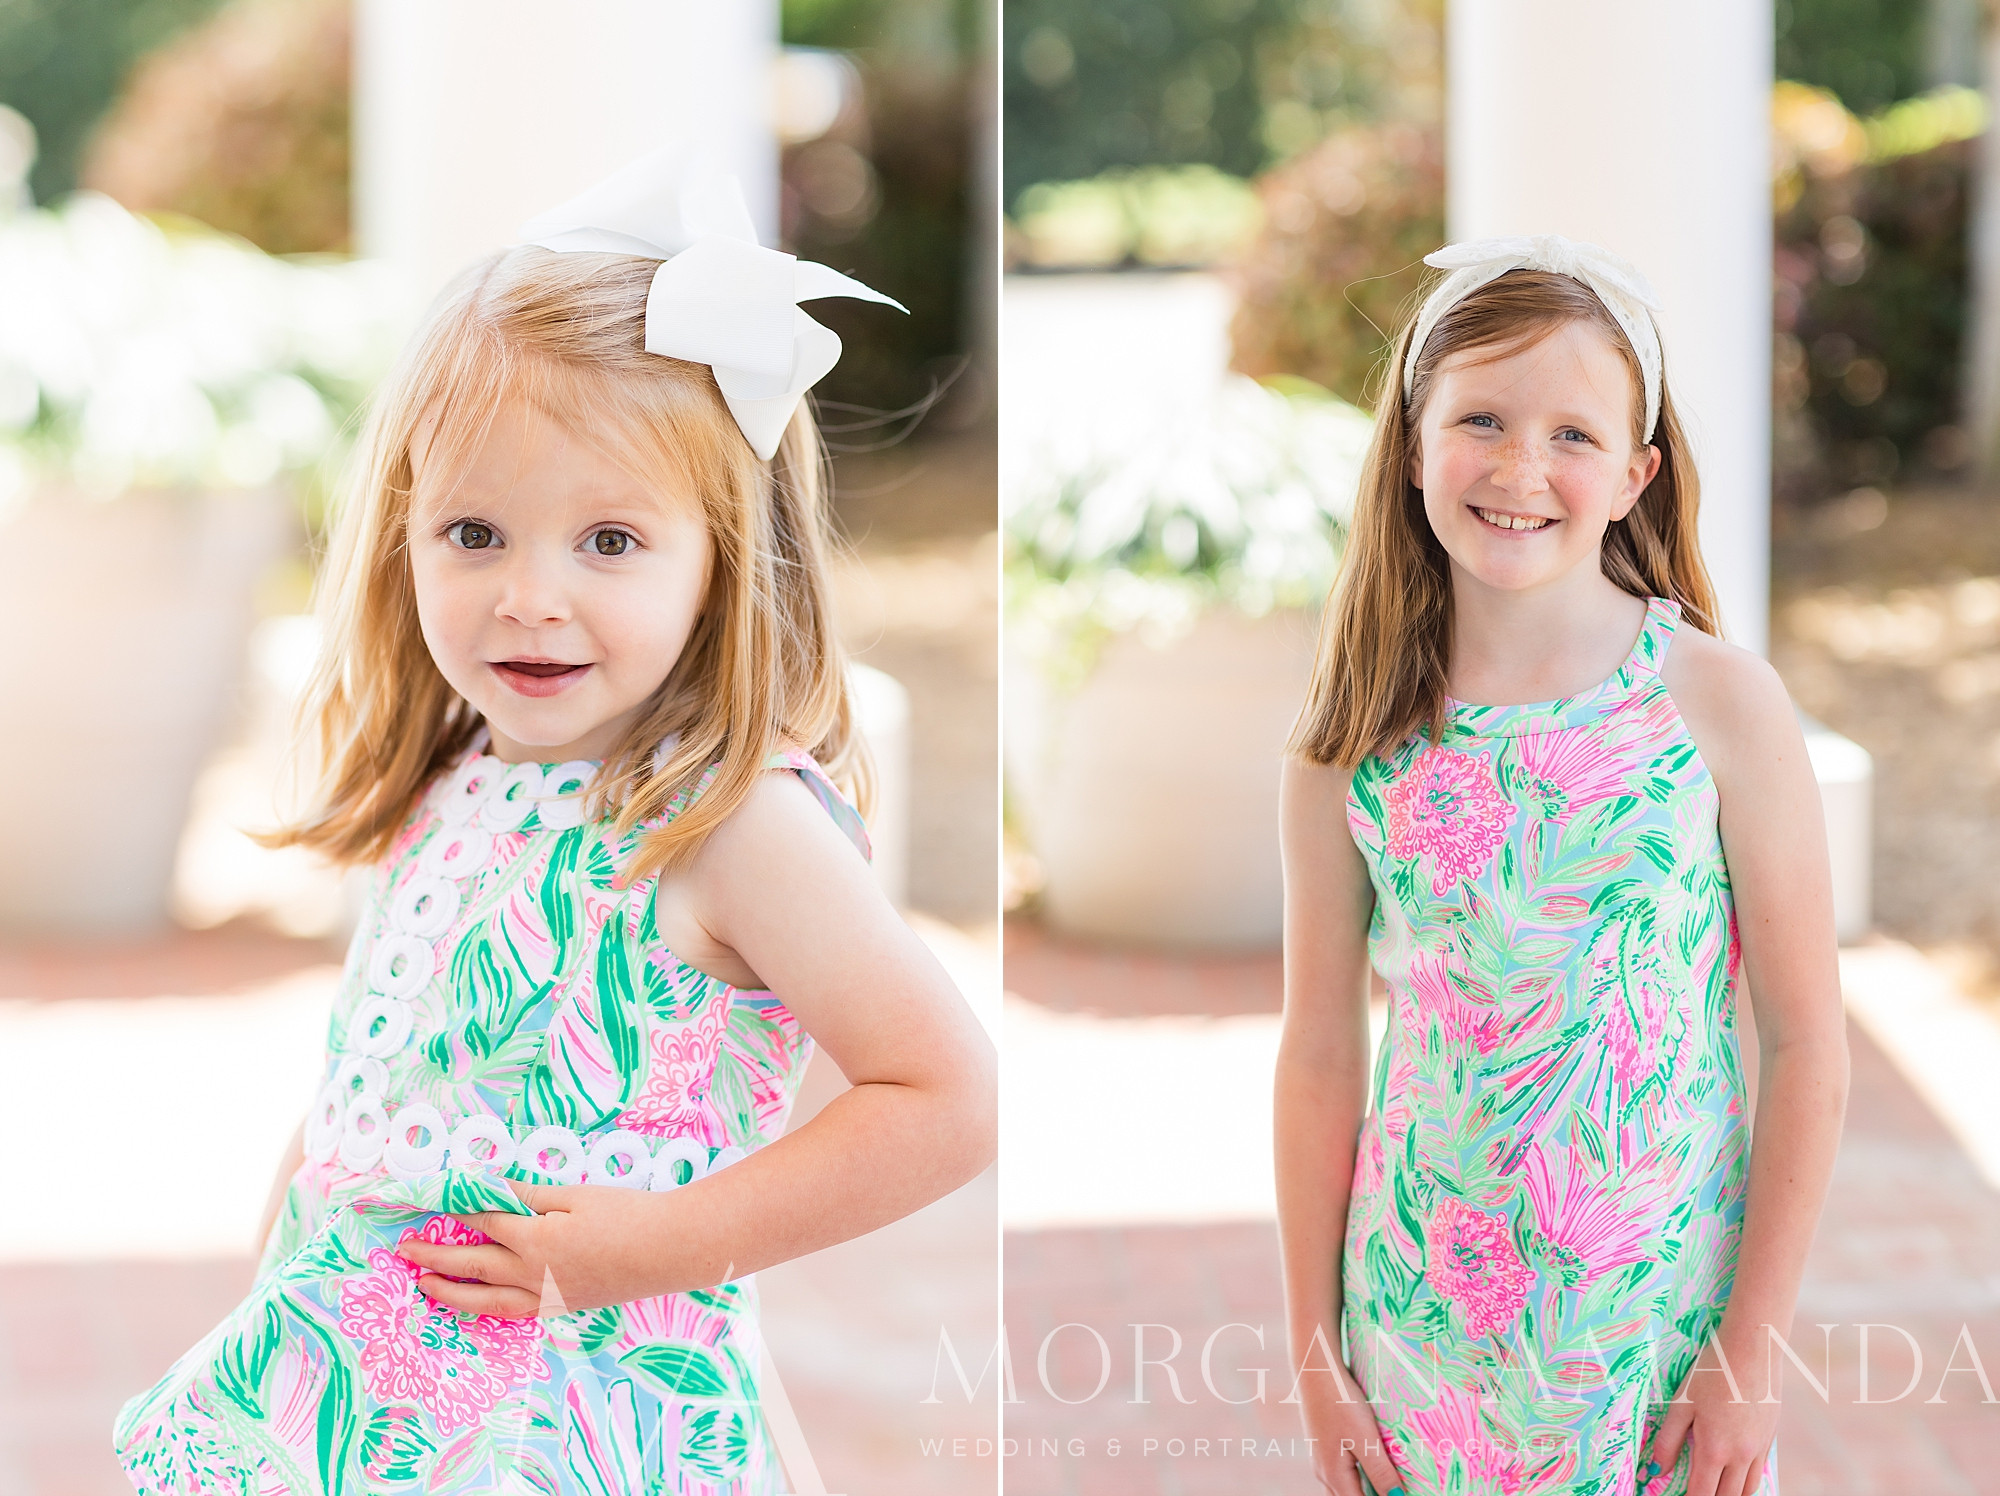 girls in Lily Pulitzer dresses pose together on Easter Sunday